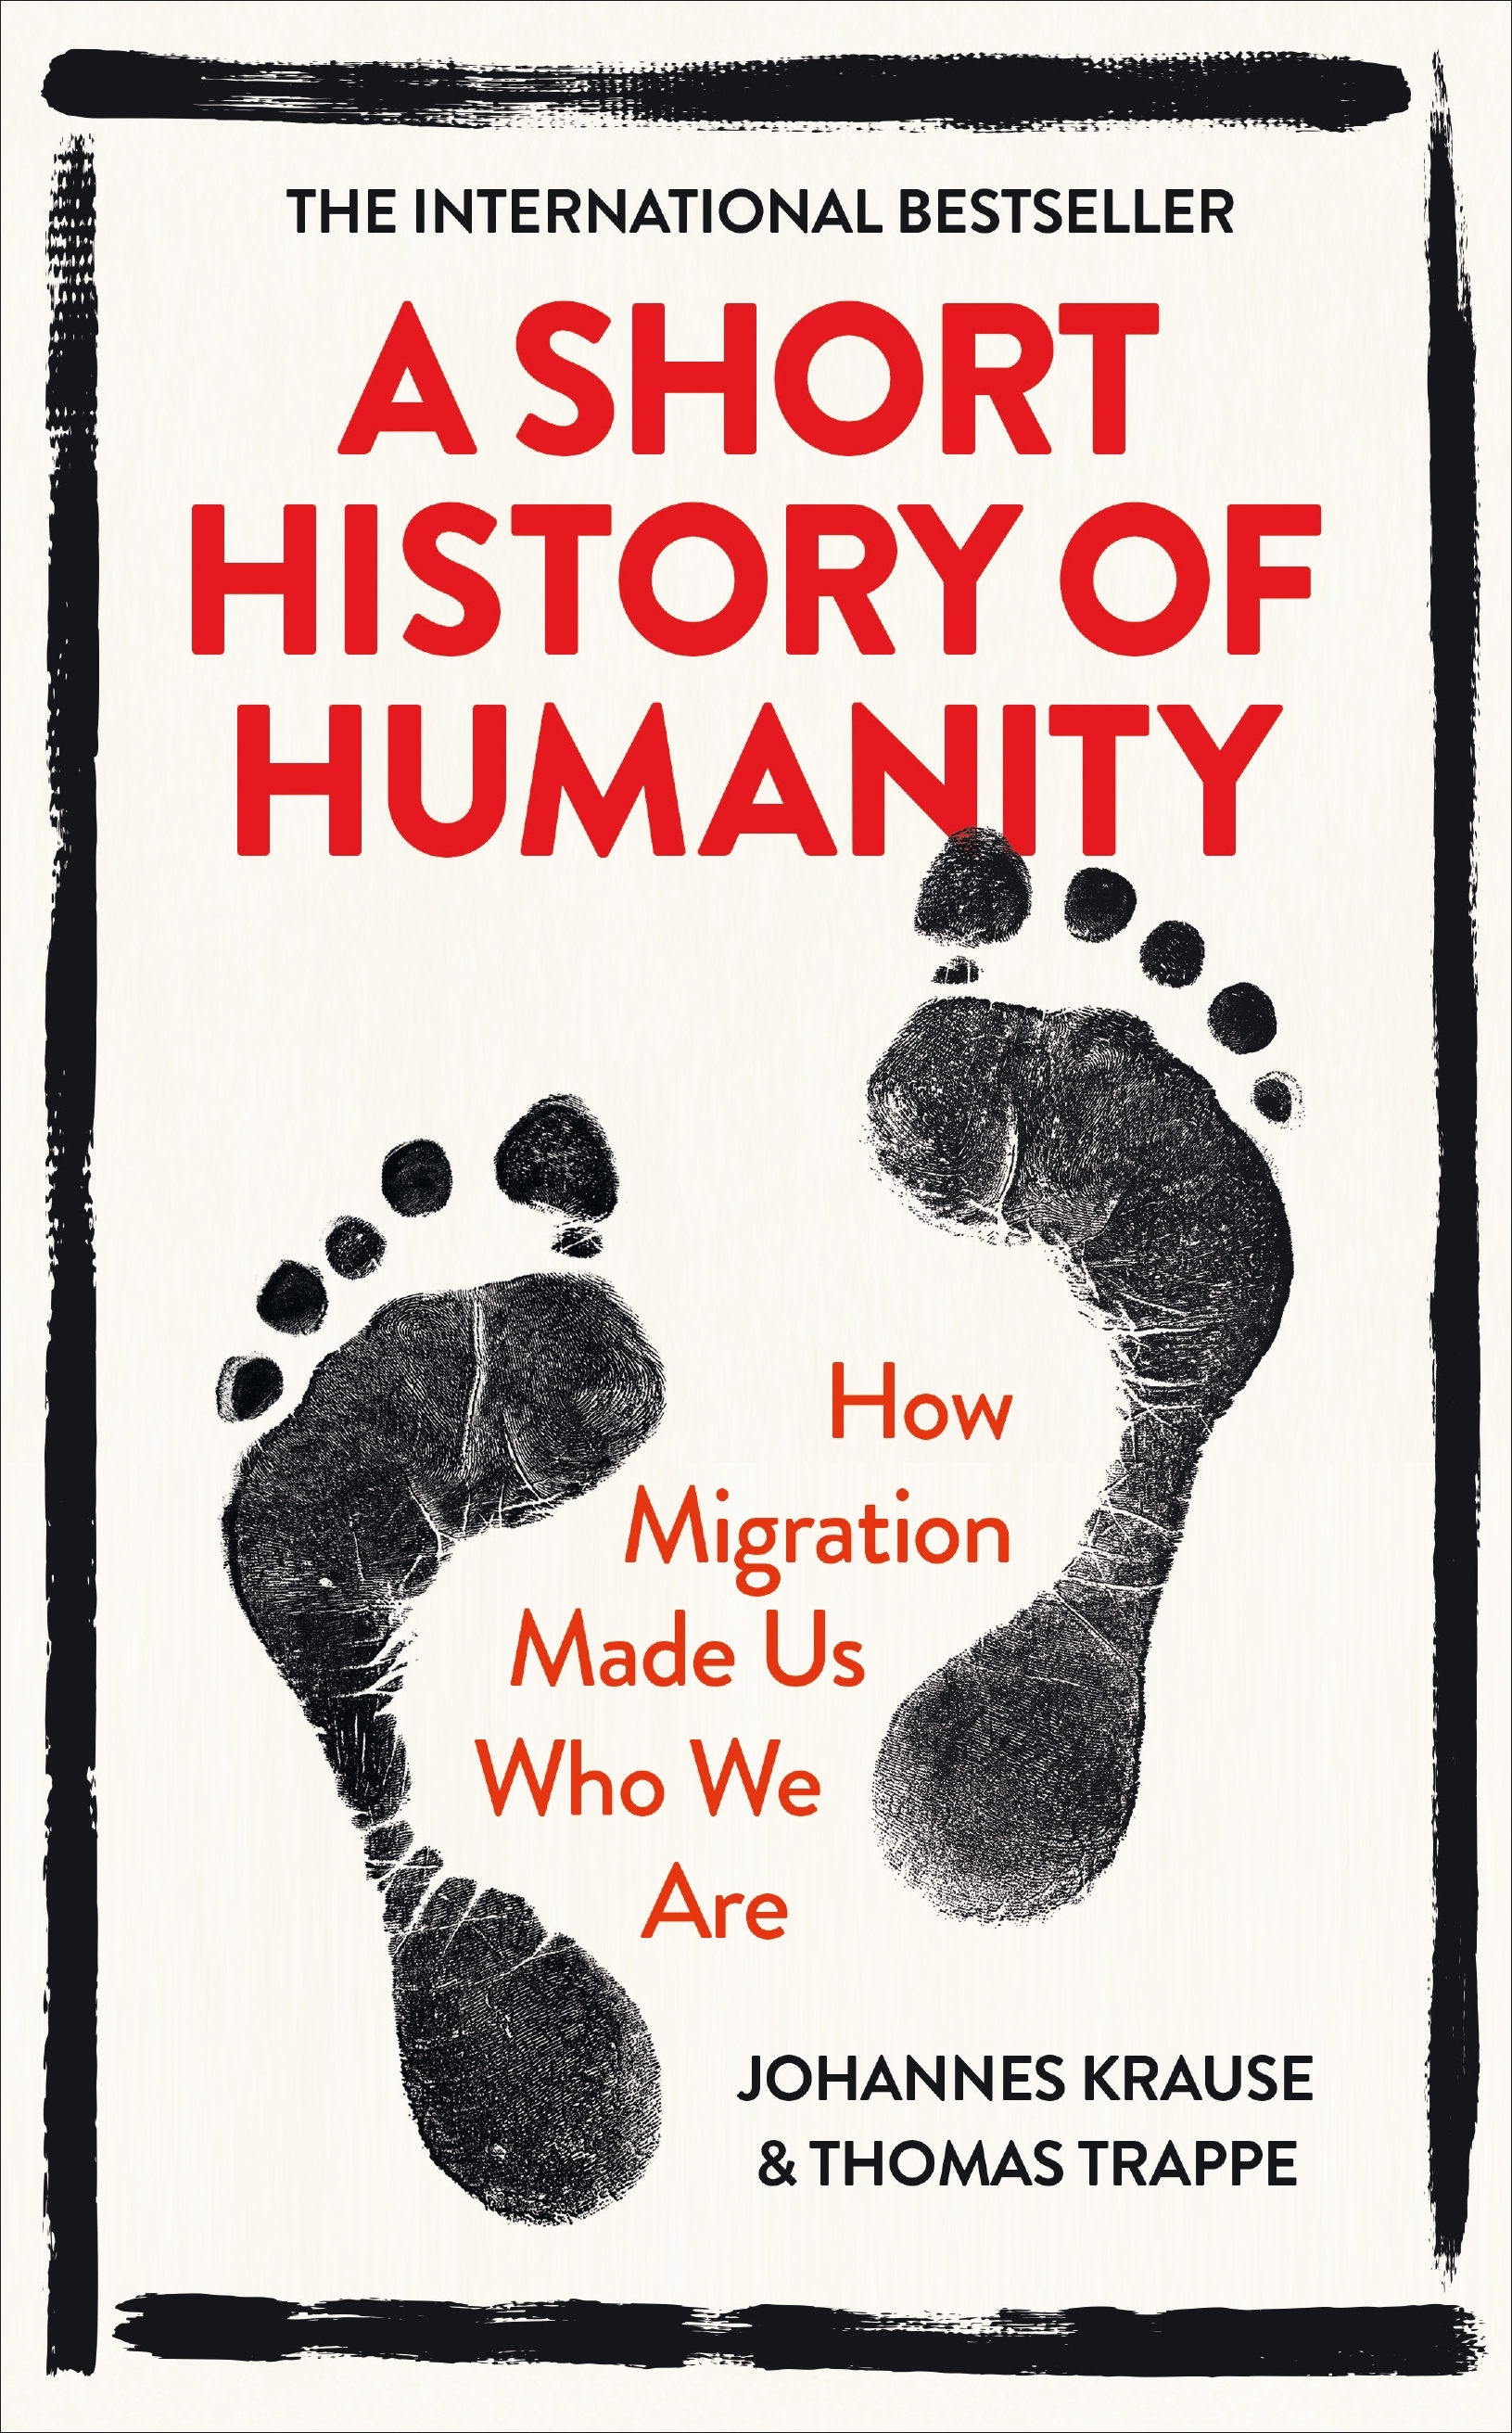 A Short History of Humanity by Johannes Krause - Penguin Books Australia